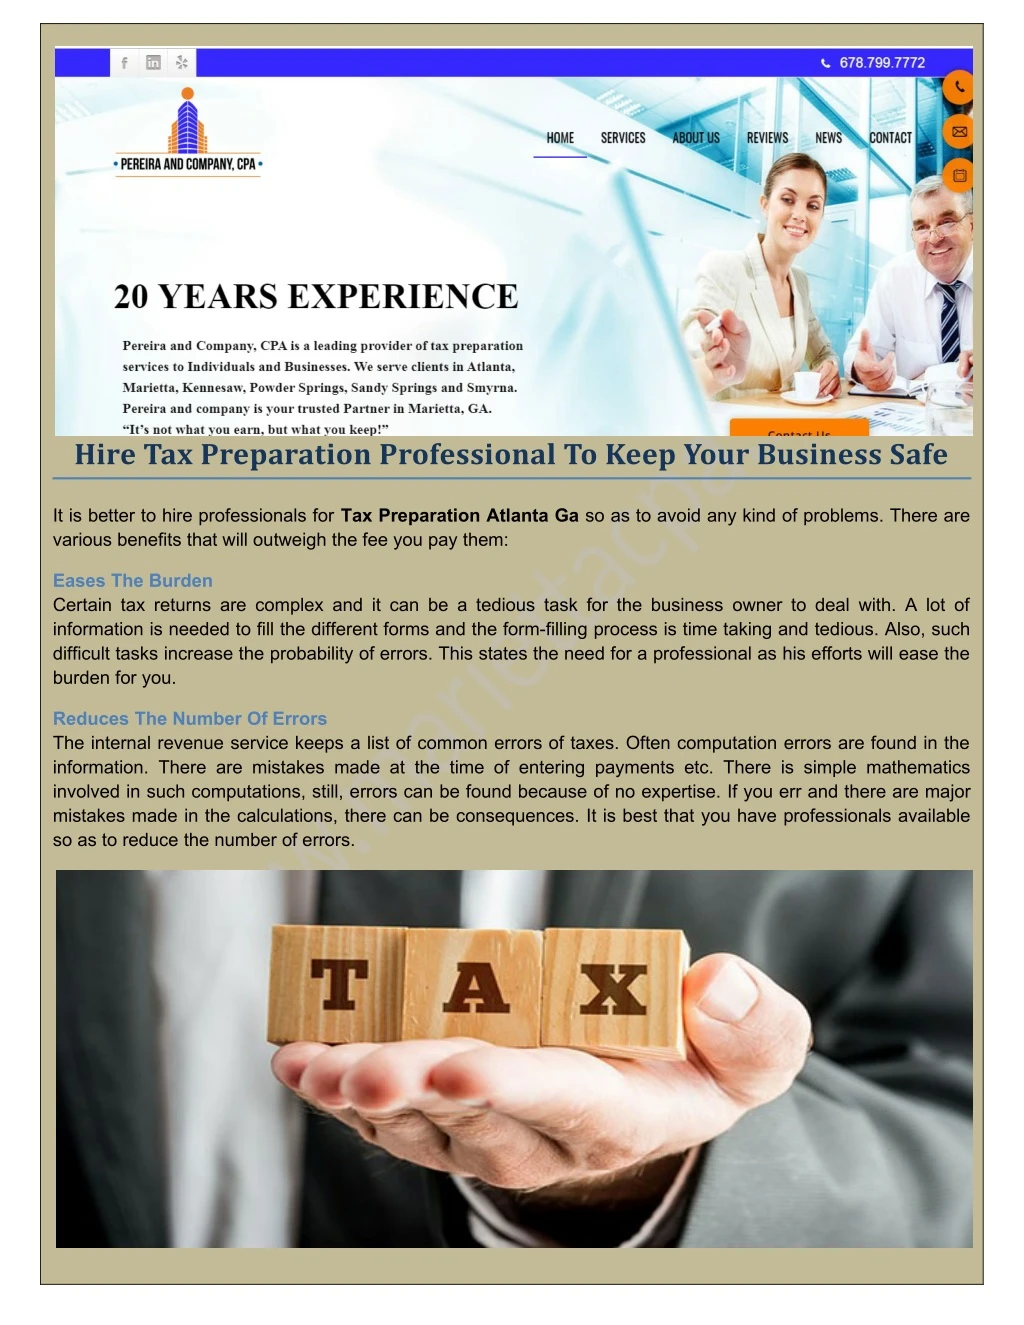 hire tax preparation professional to keep your